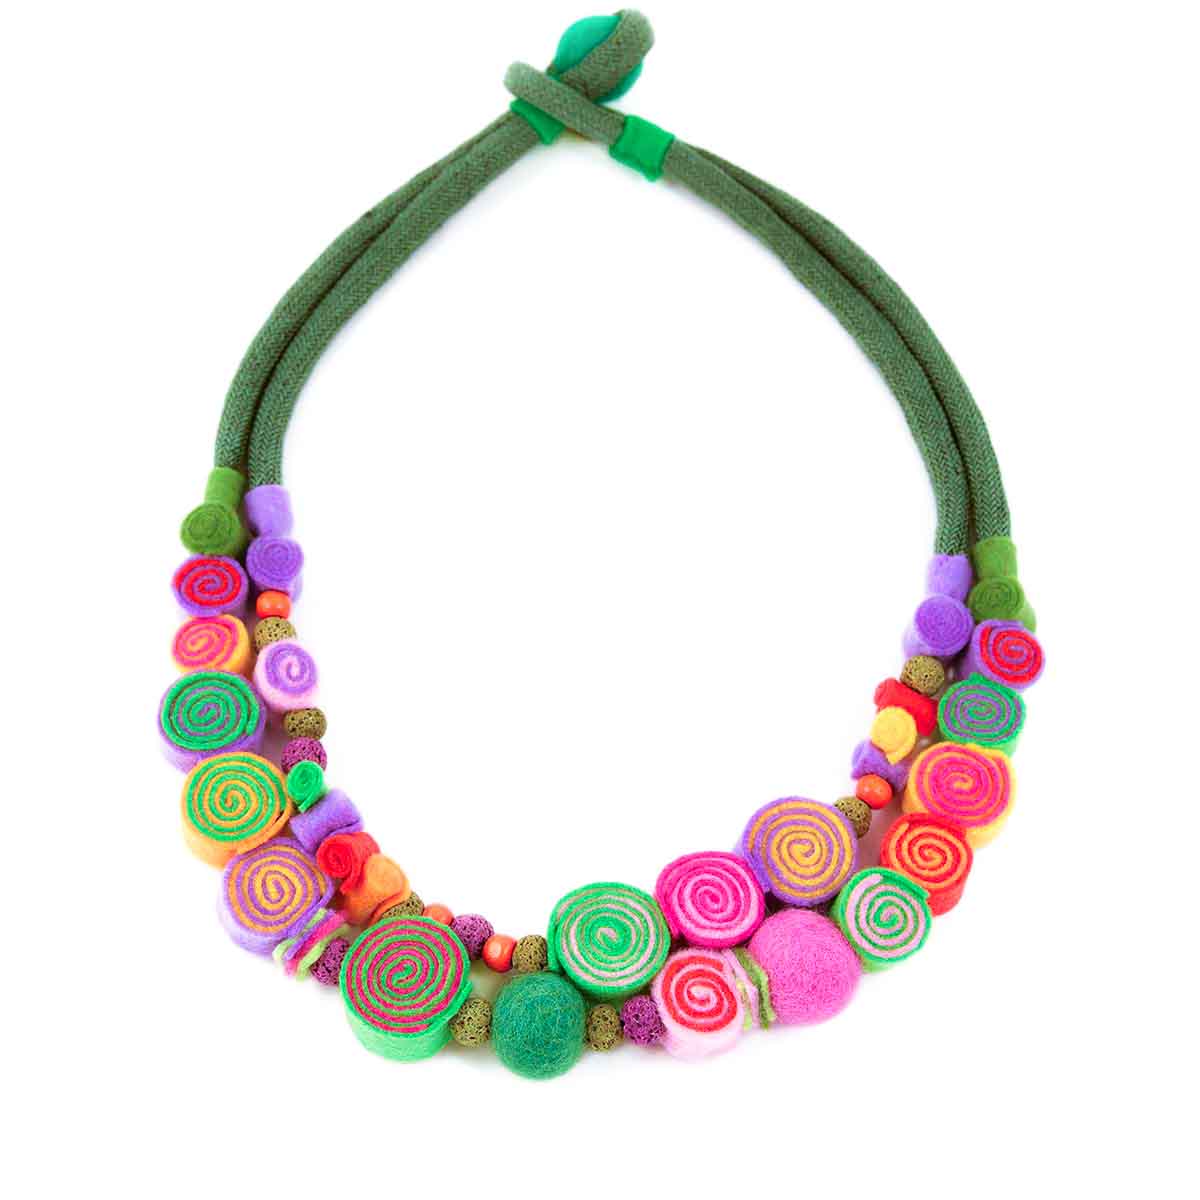 Statement felt necklace designed and made for Bead A Boo by katerina Glinou.